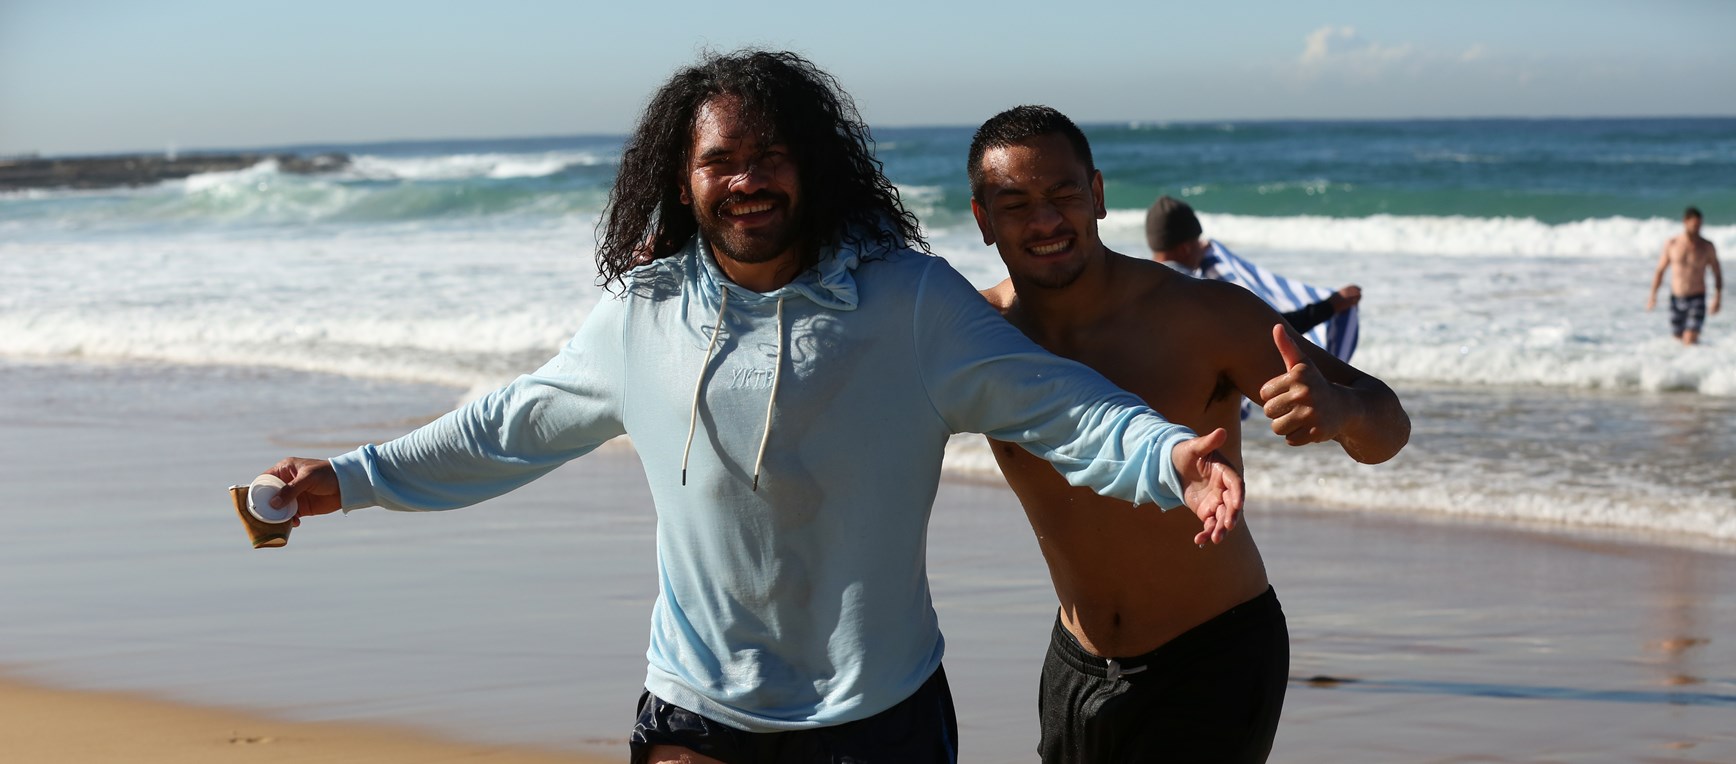 GALLERY: Beach Recovery